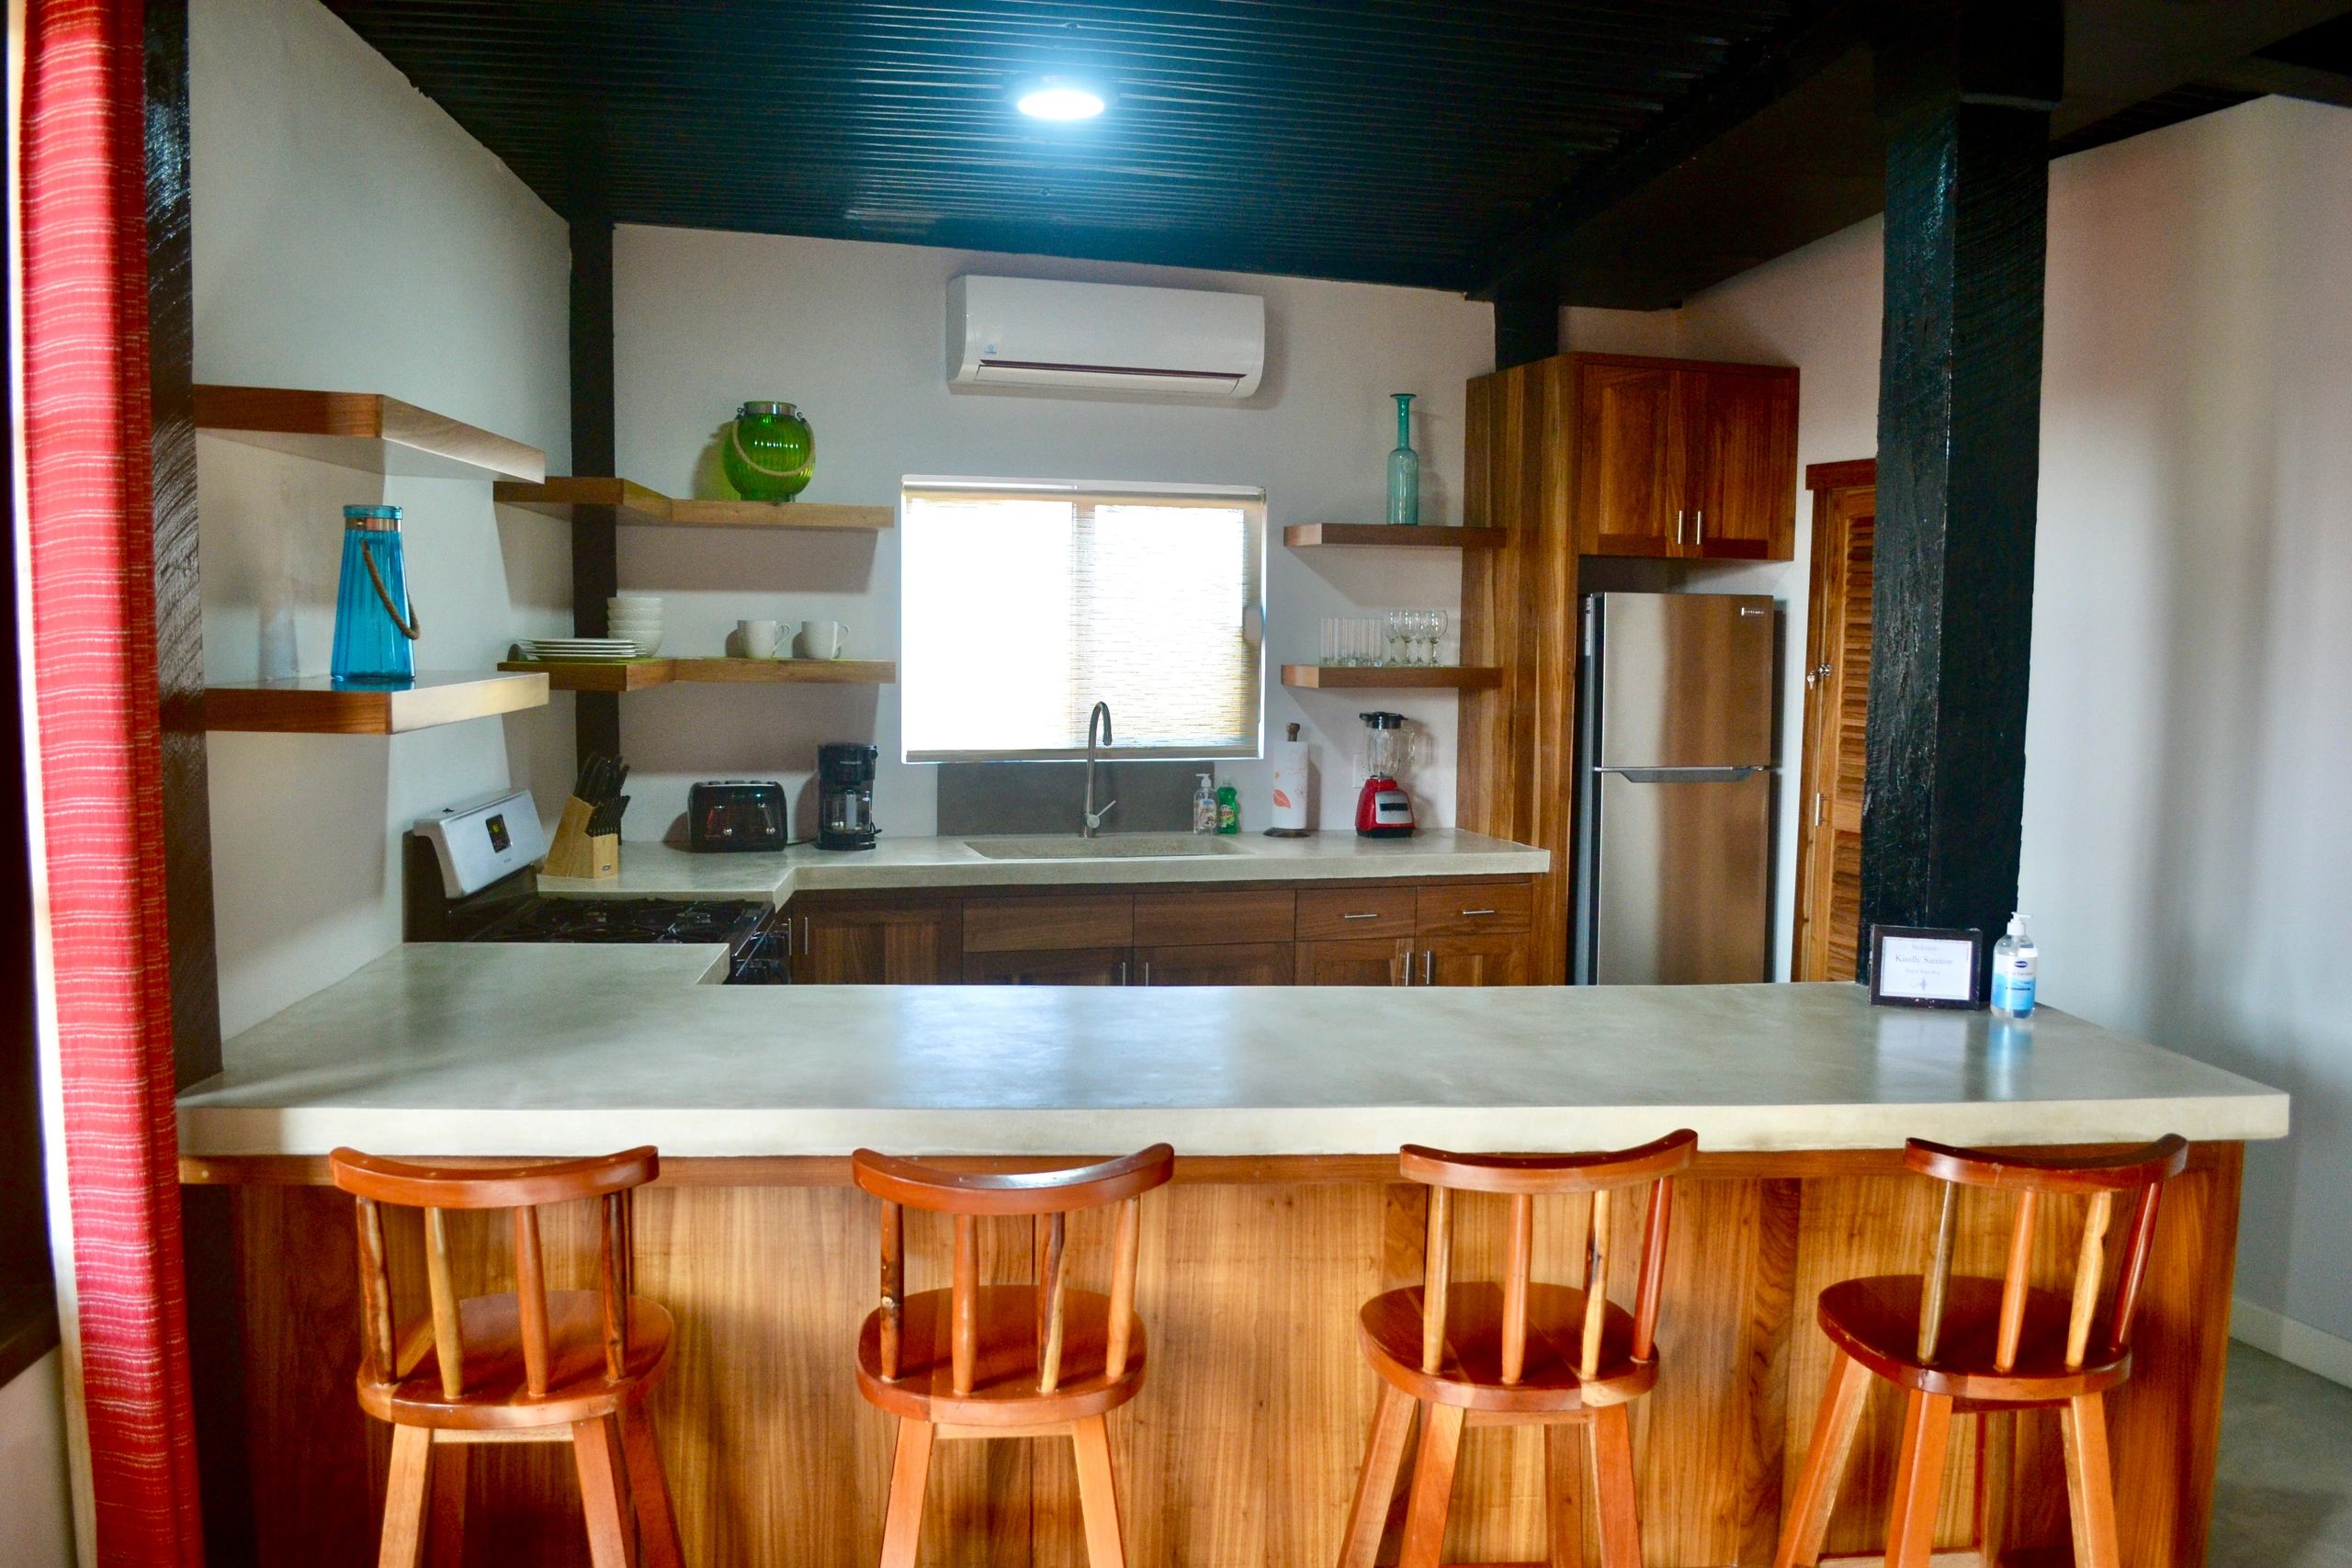 Manta Ray Suite: Our large two-bedroom vacation rental in San Pedro, Belize